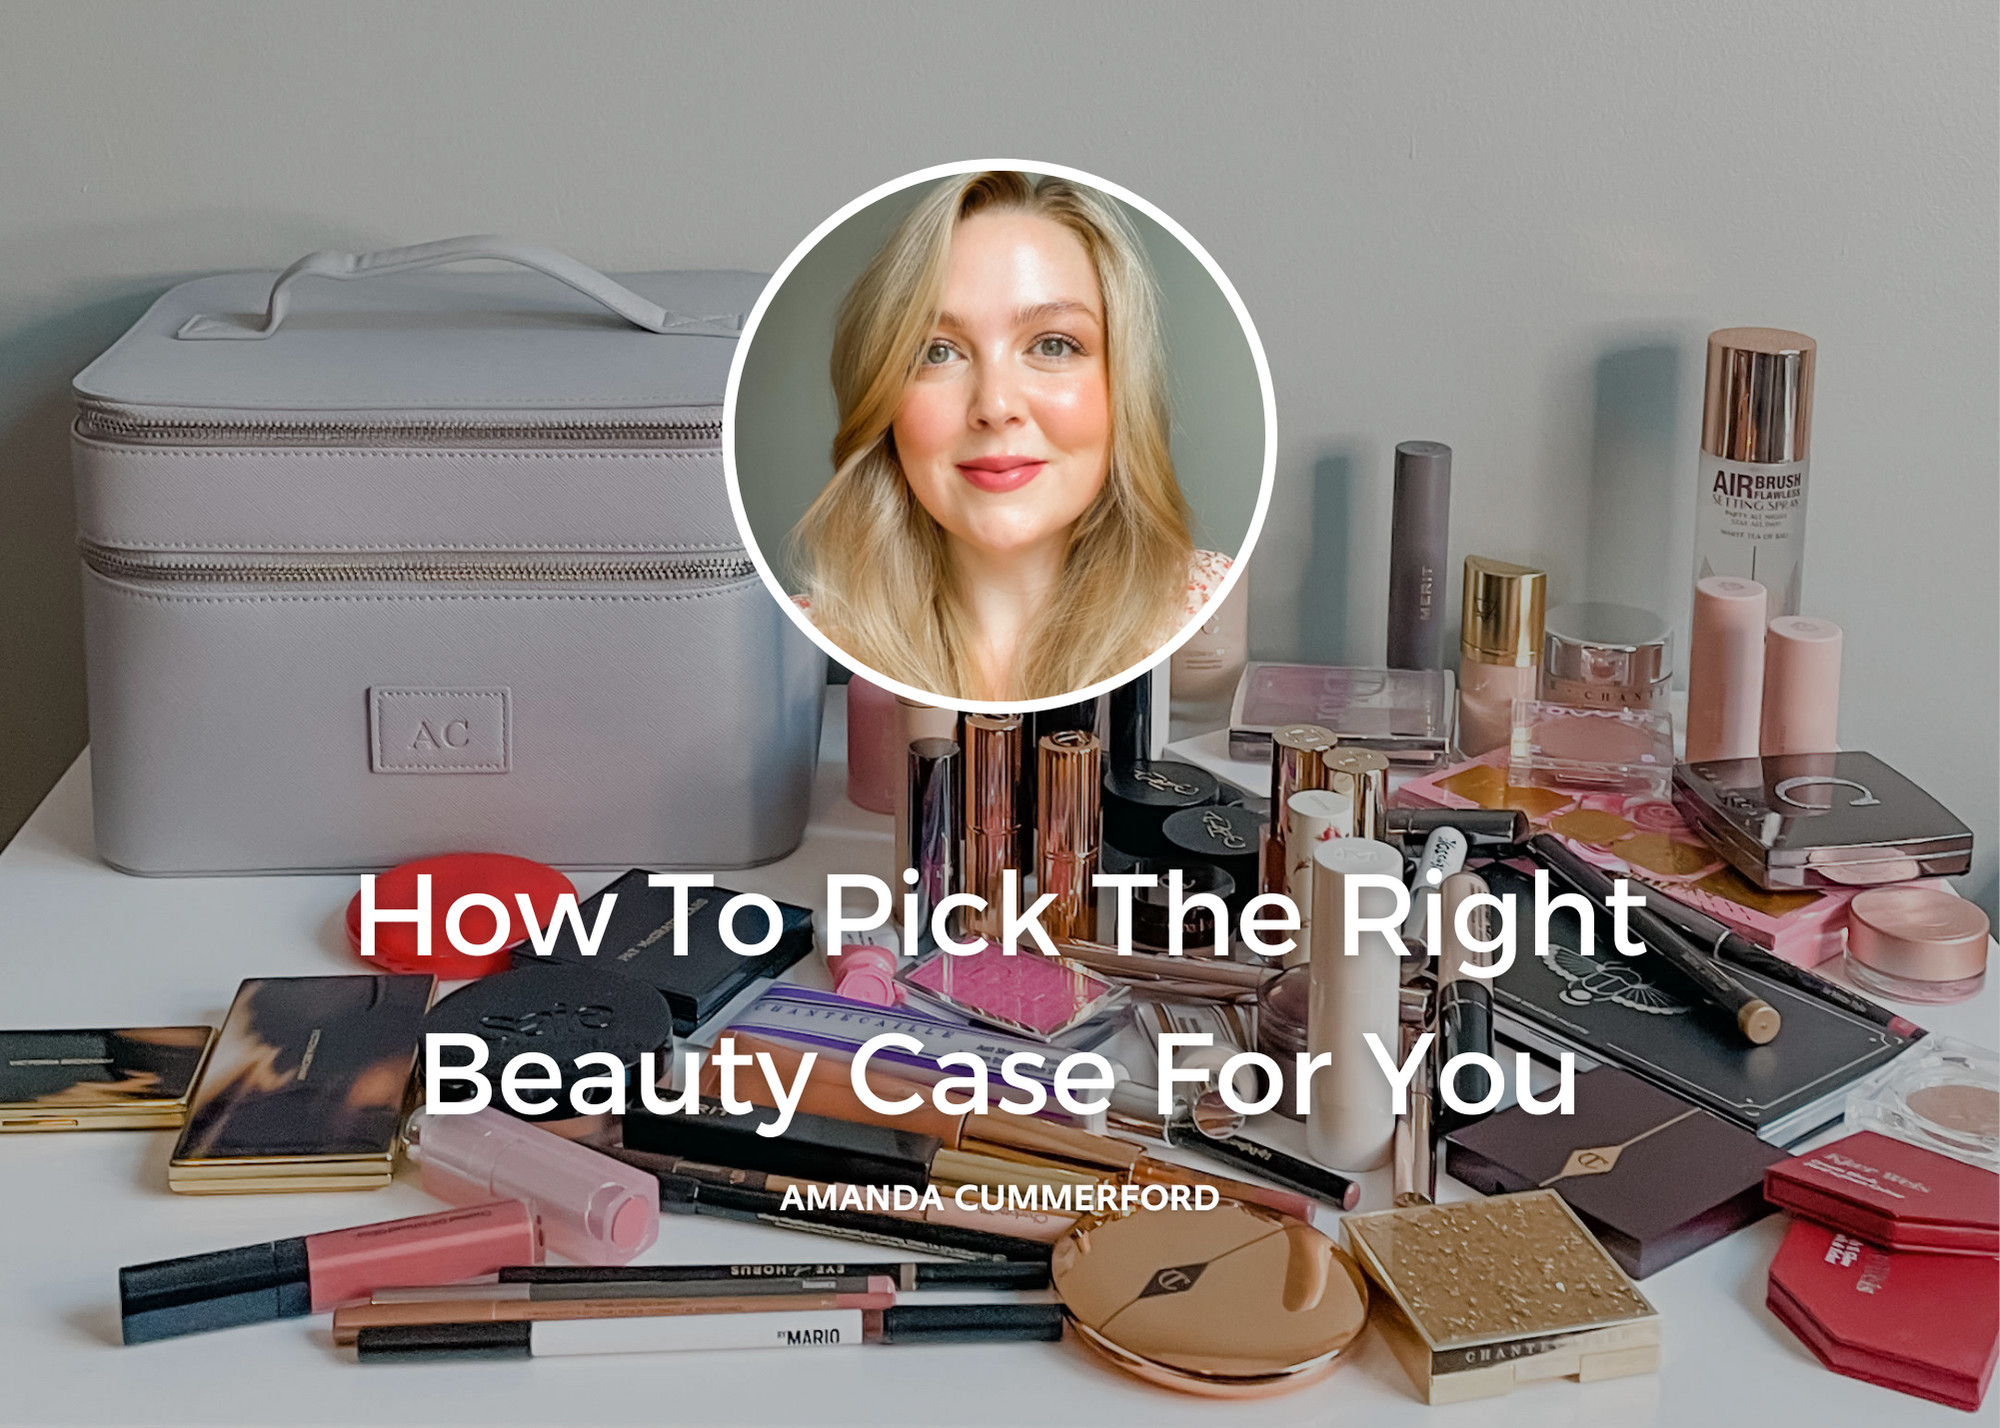 How To Pick The Right Beauty Case For You By Amanda Cummerford